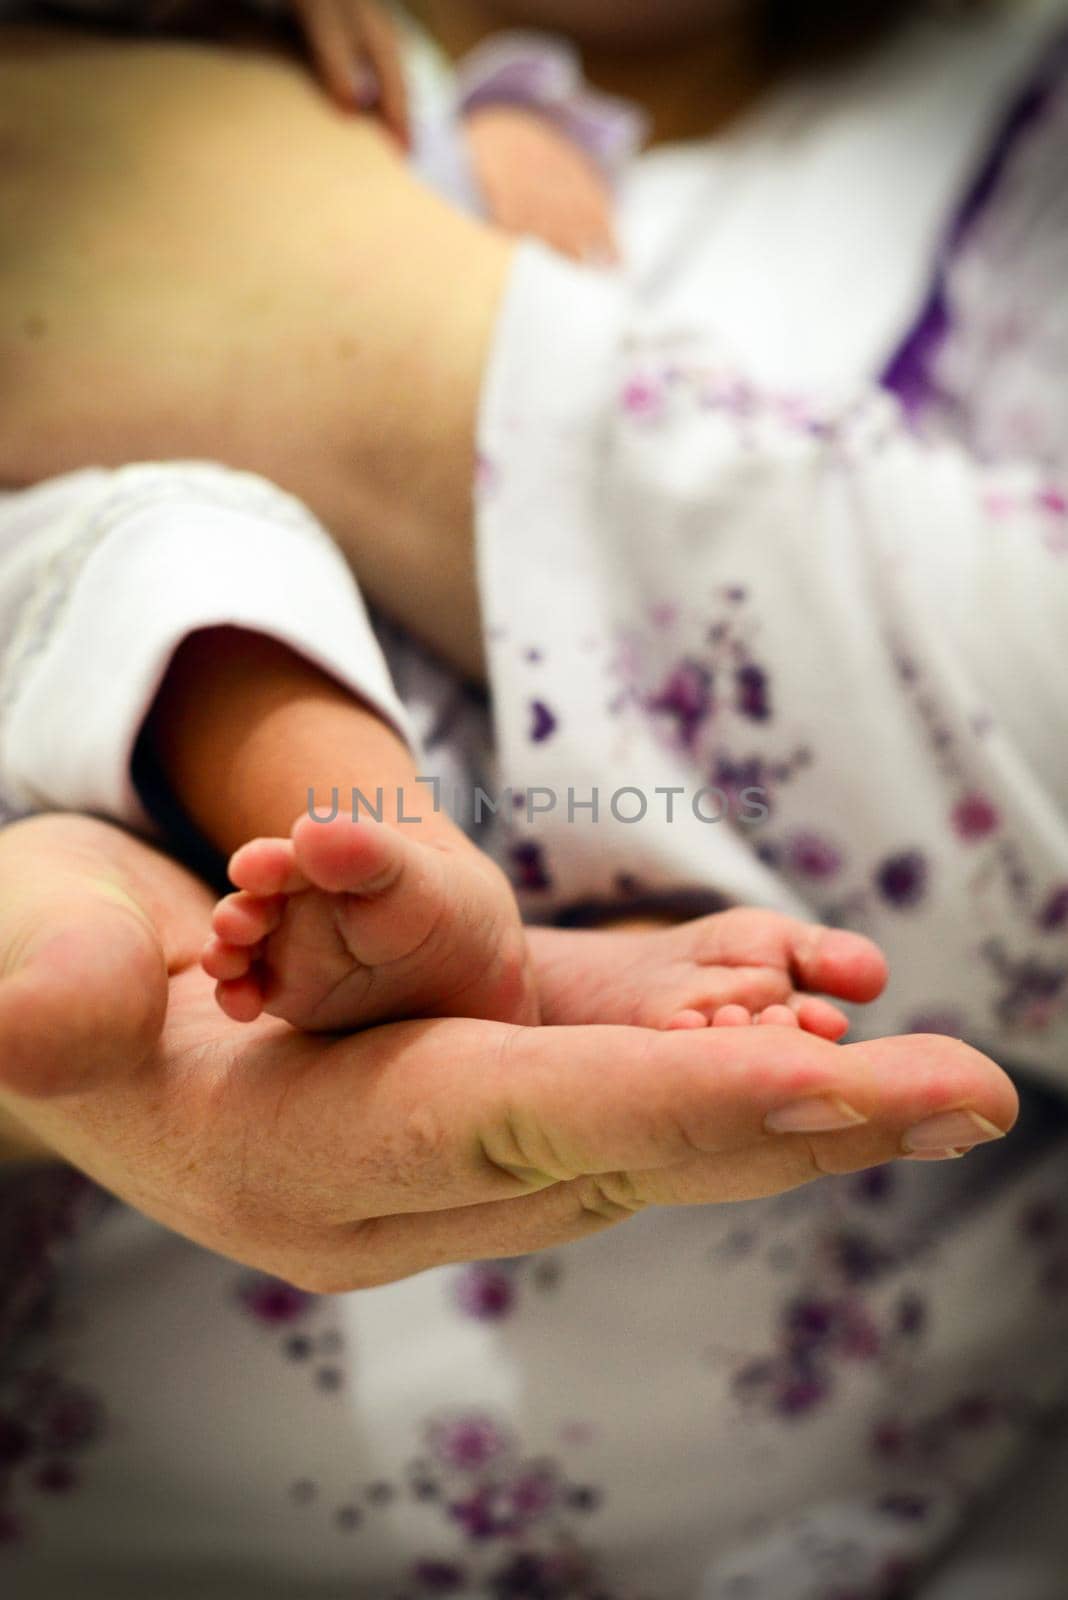 Newborn baby foot in mother hand close up view portrait image by tasci